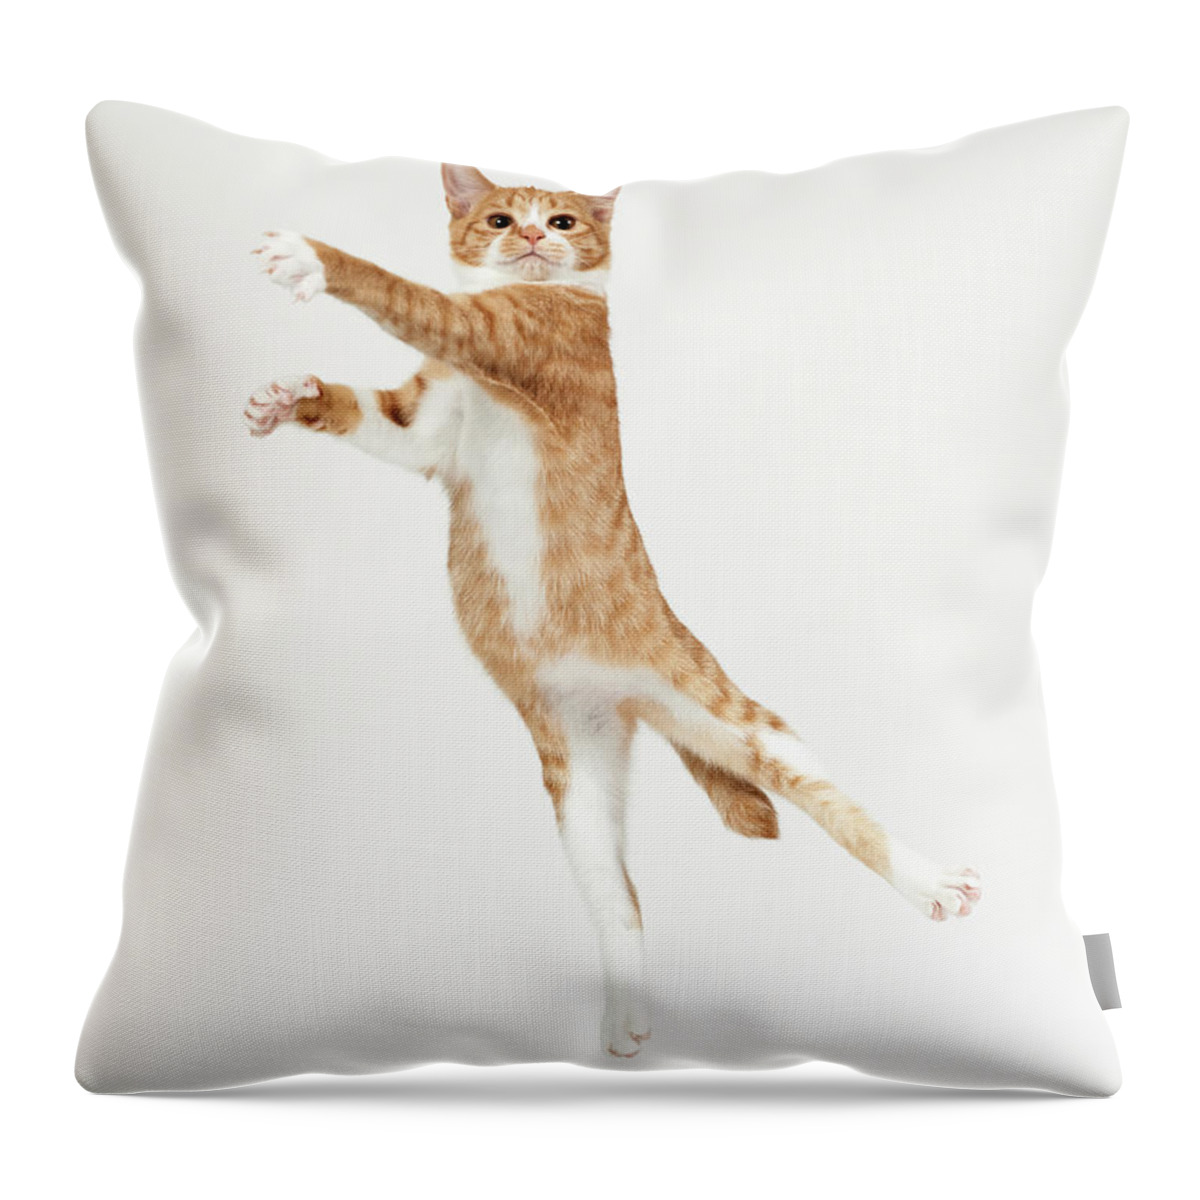 Pets Throw Pillow featuring the photograph Ginger Kitten Jumping Like Dancer by Akimasa Harada